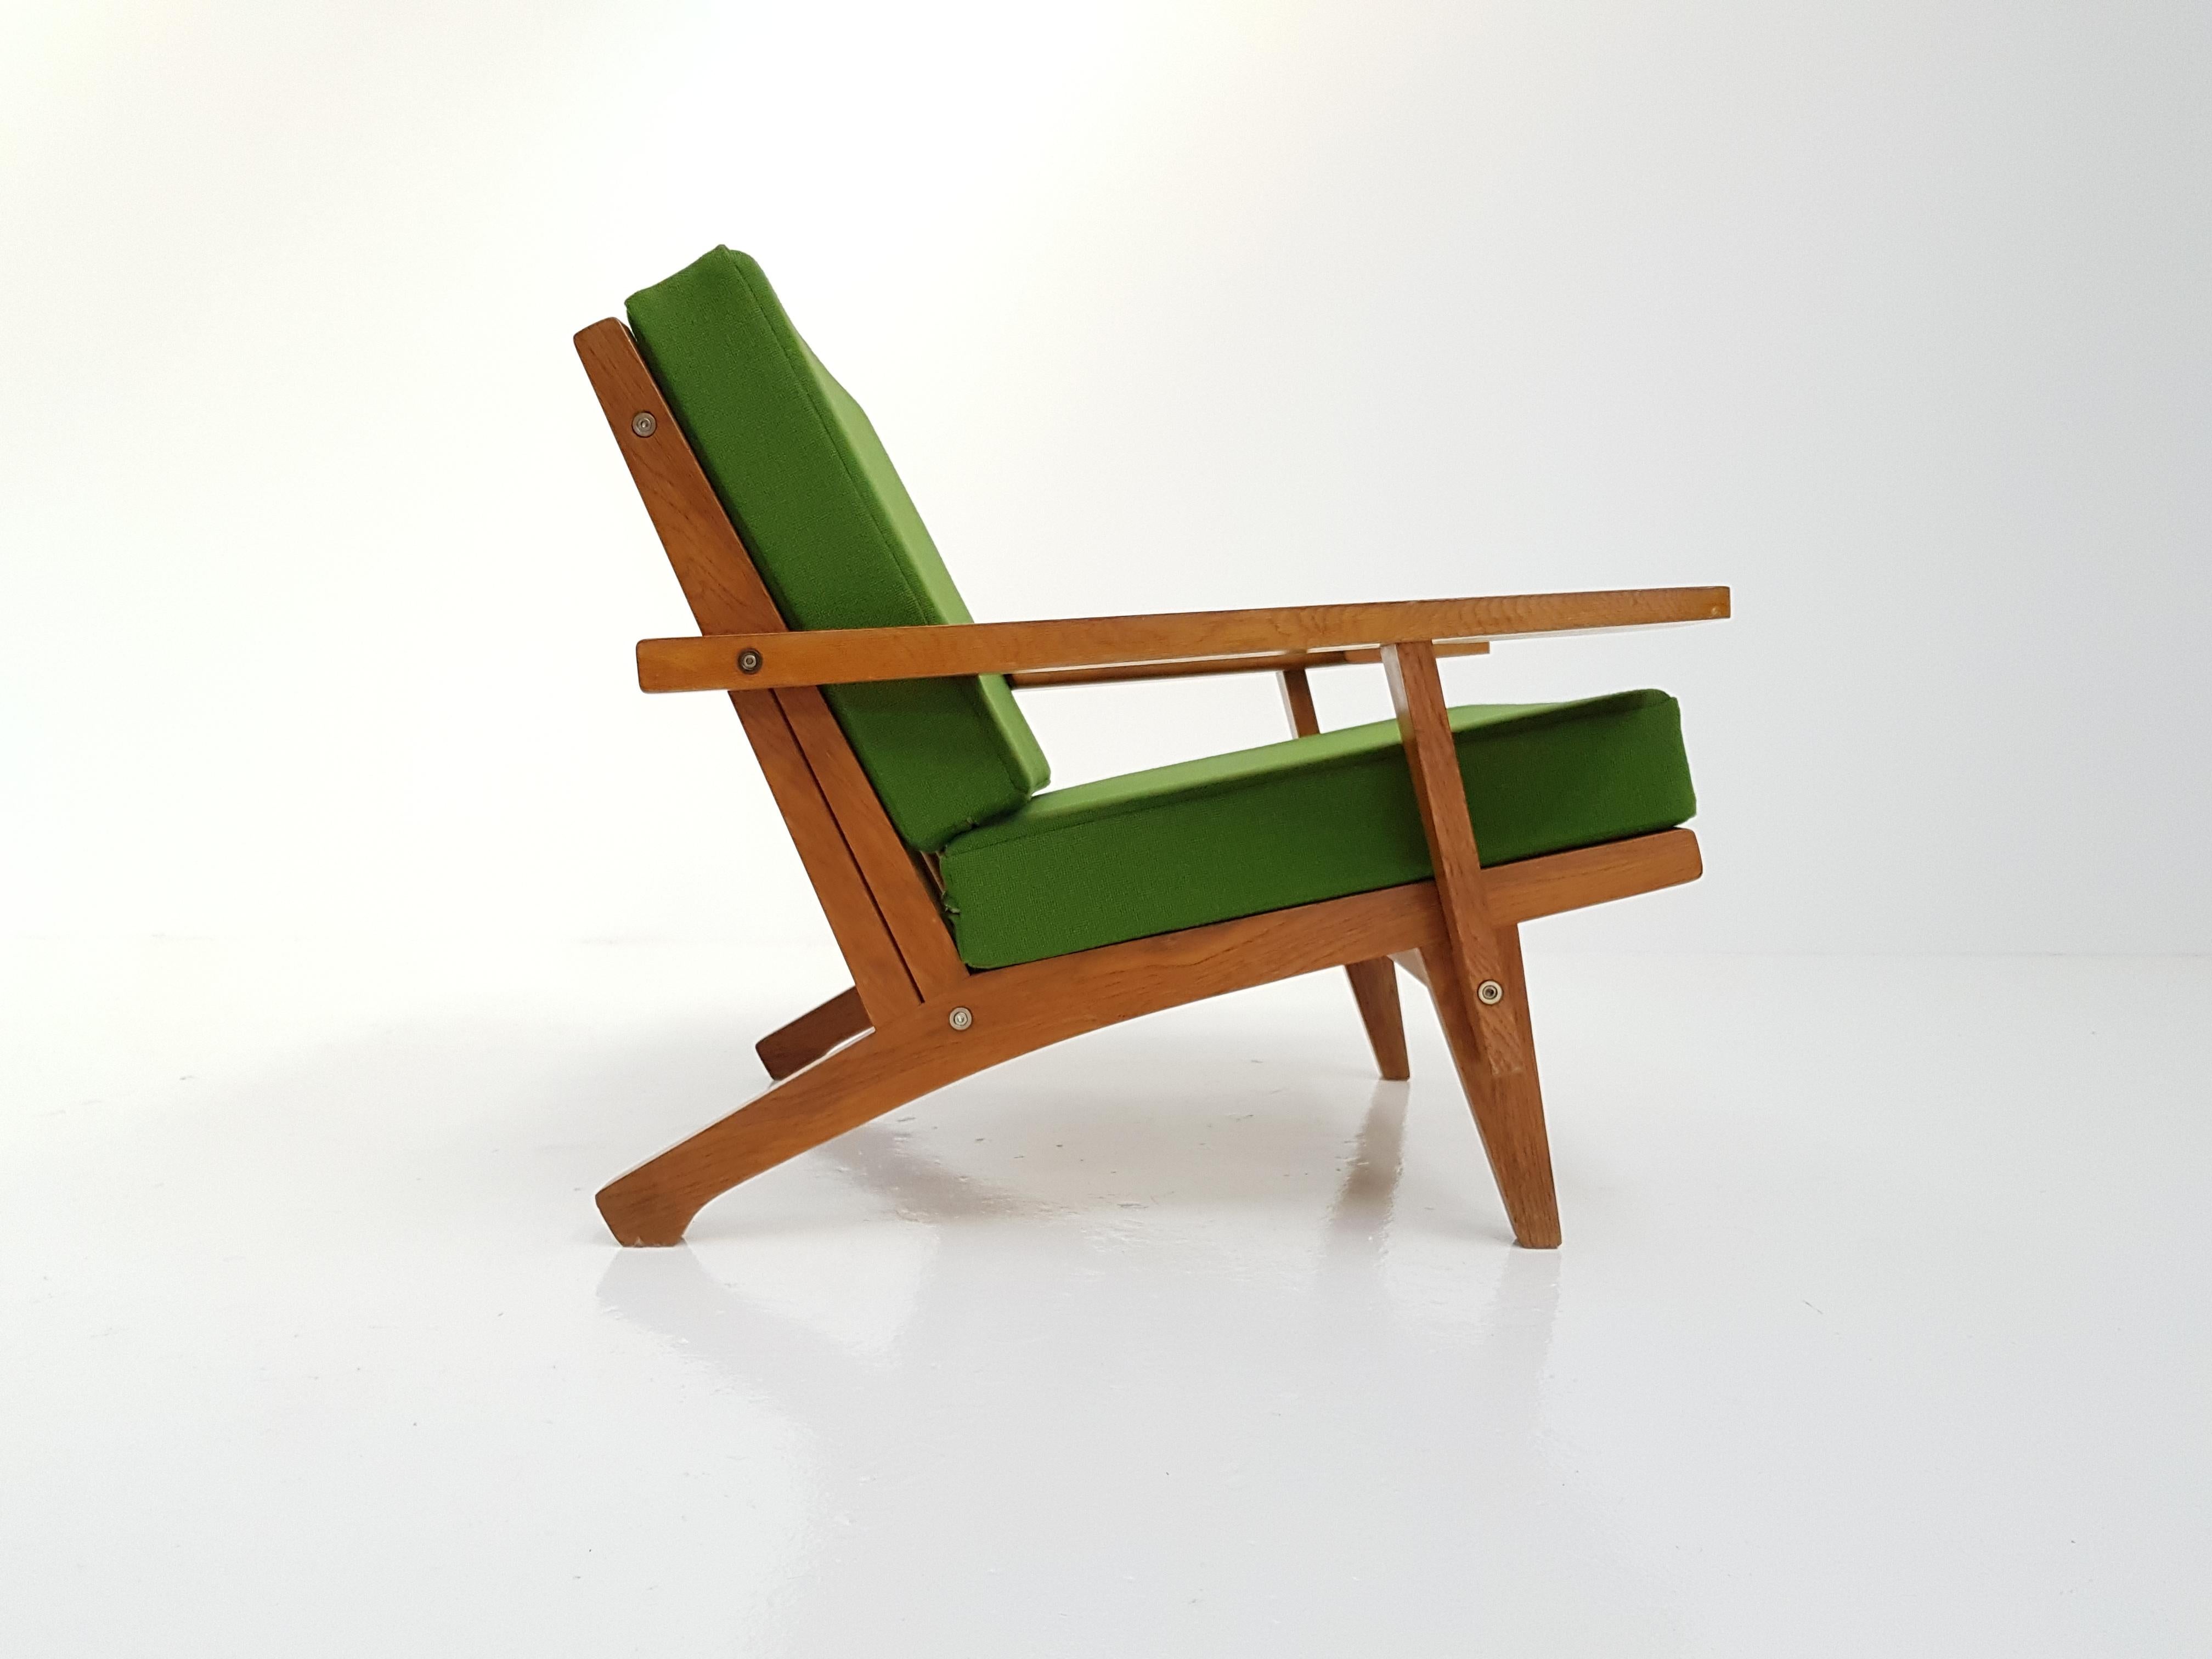 Iconic Danish Hans J Wegner GE-375 lounge chair.

Designed during the 1960s, oak frame with new Kvadrat Hallingdal 65 fabric, refinished and rewebbed, produced and stamped Getama Gedsted, Denmark.

The frame dismantles resulting in very